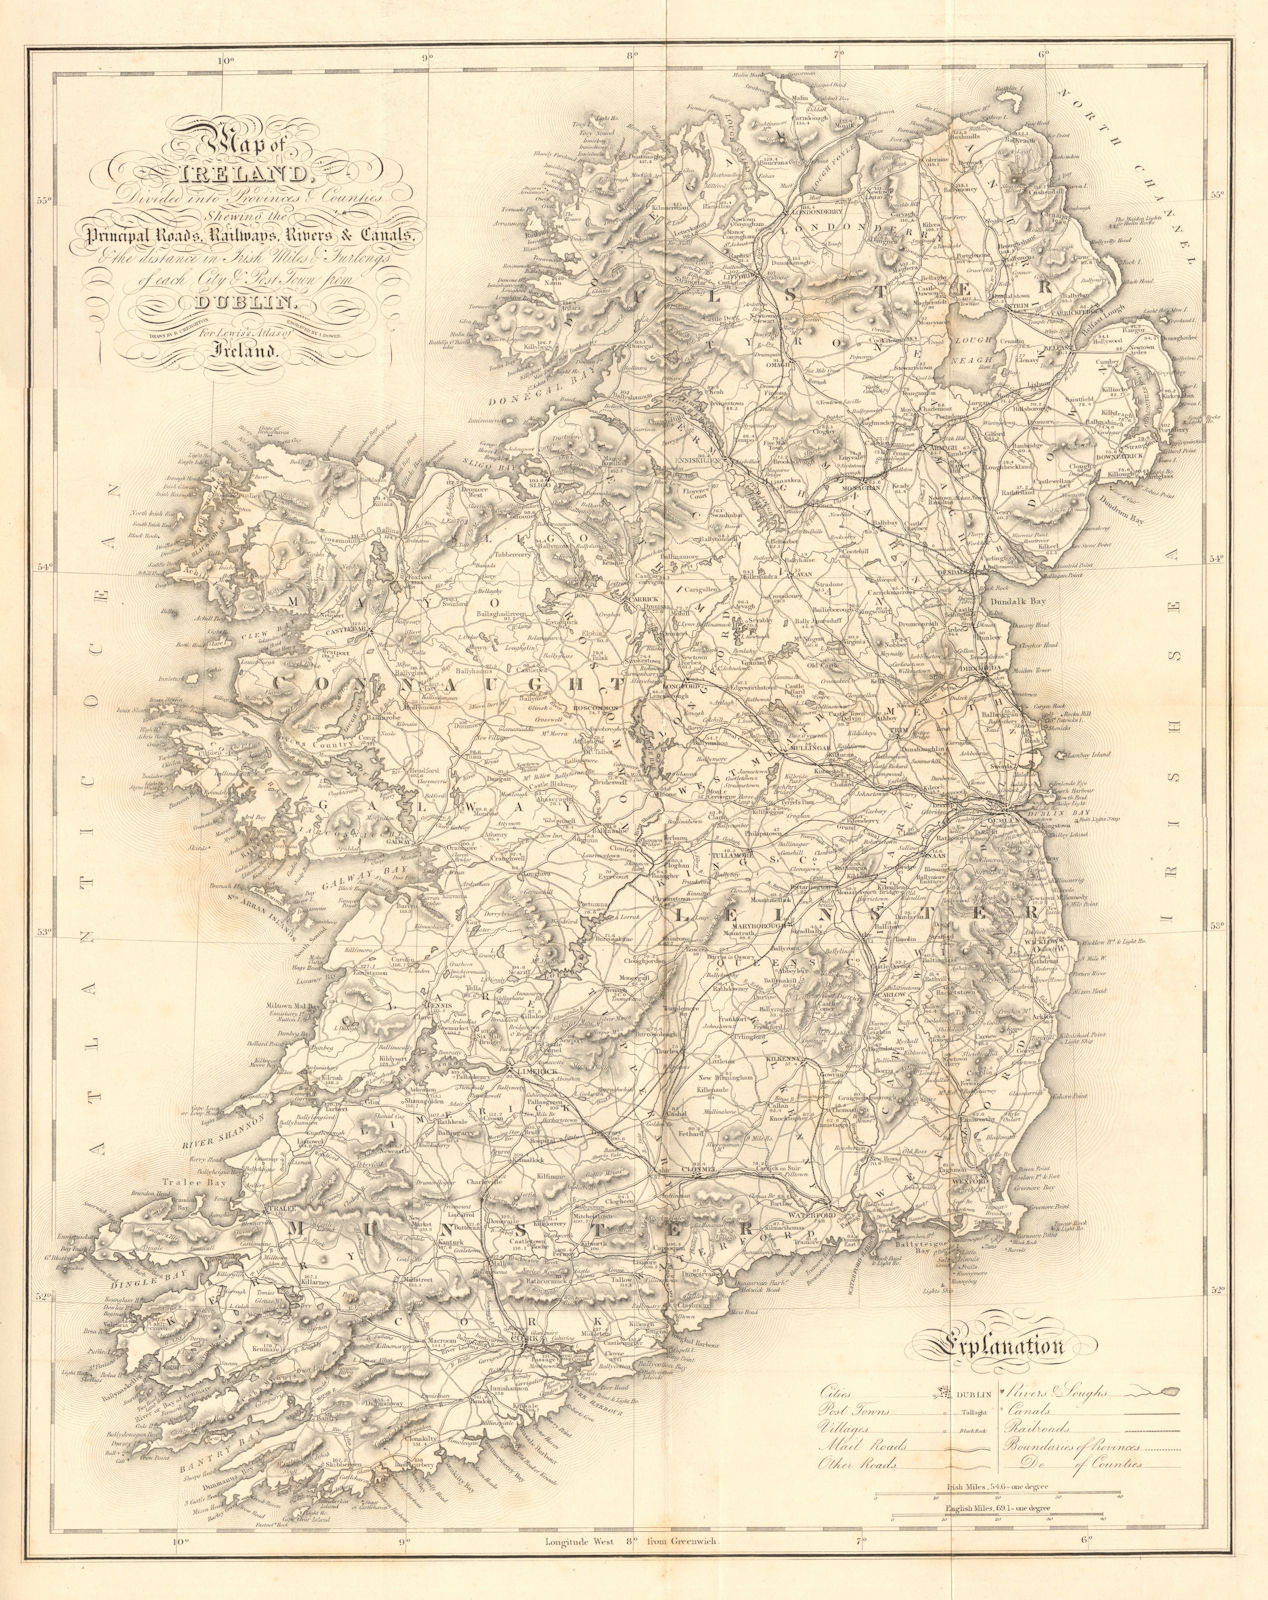 Associate Product "Map of Ireland, divided into provinces & counties…" LEWIS/DOWER/CREIGHTON 1846